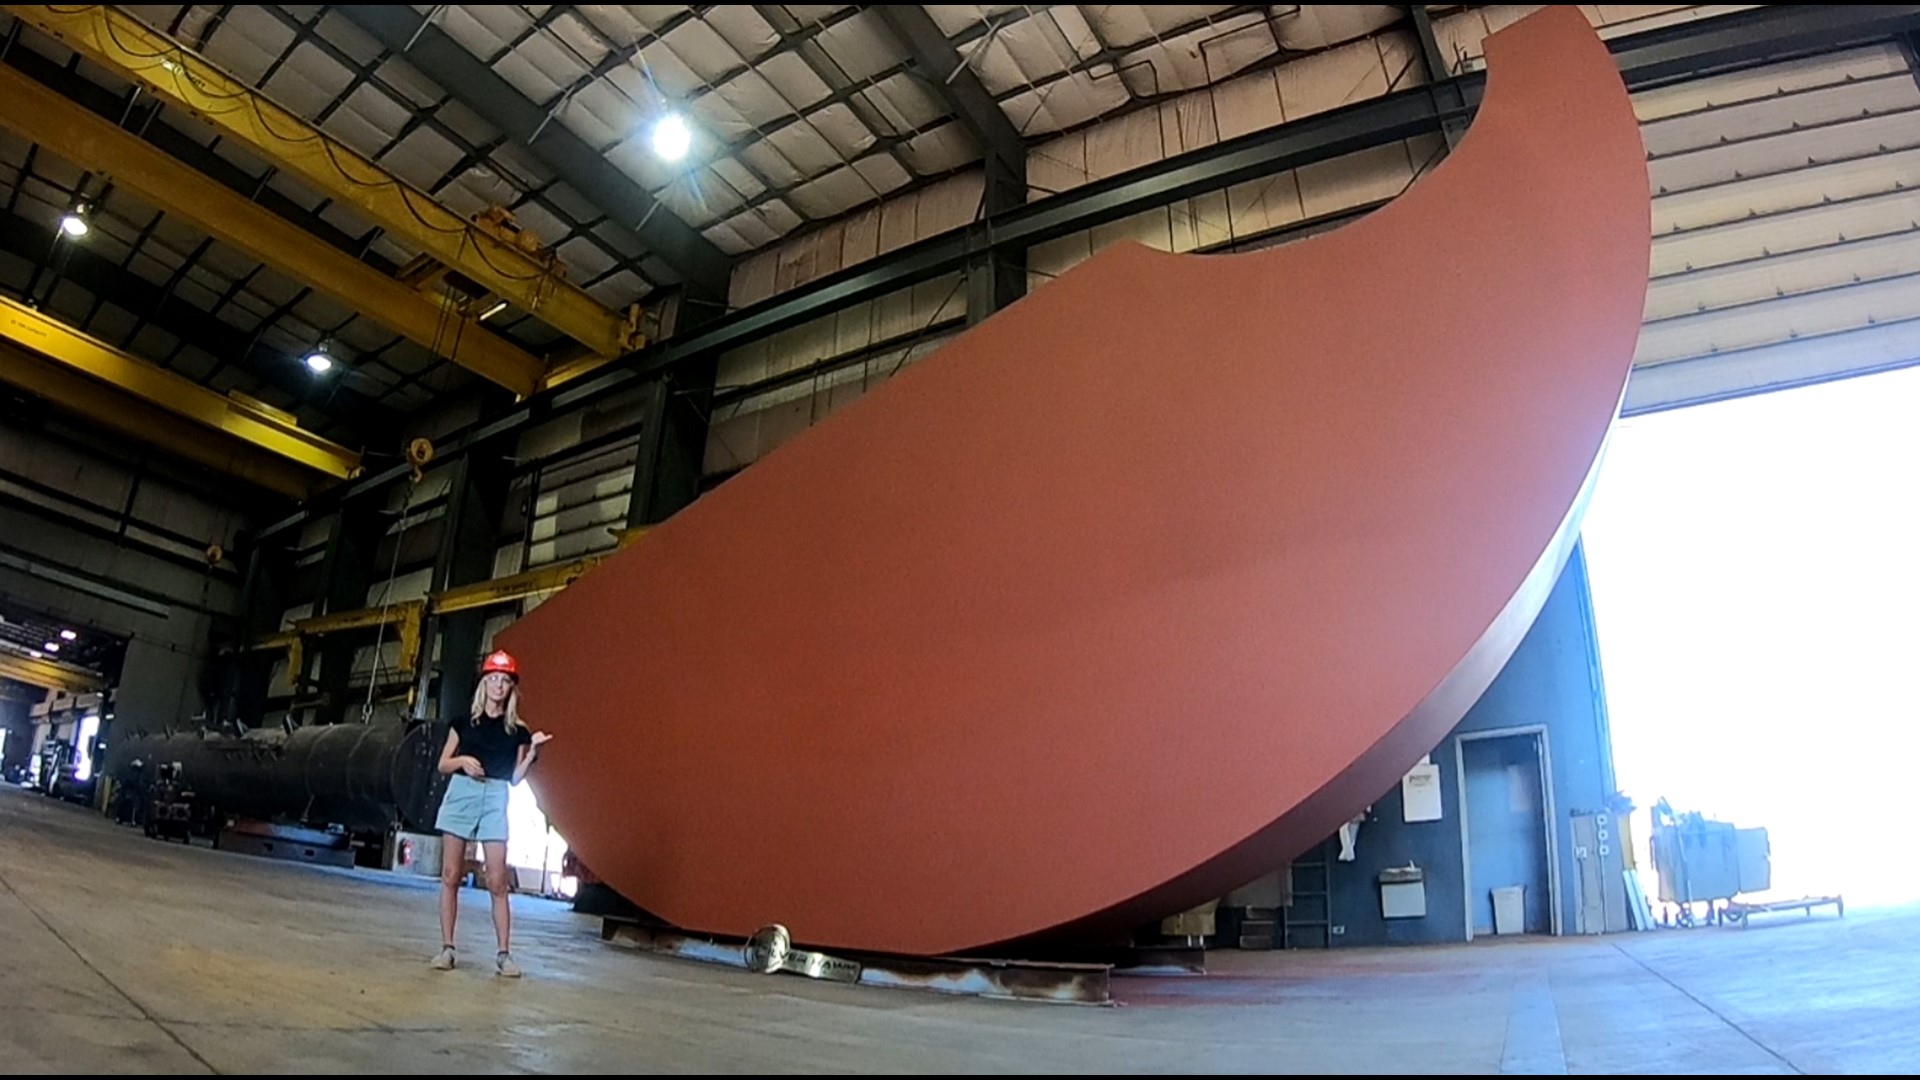 NEWS 8 EXCLUSIVE: The 40-foot long, 16,000 pound watermelon is nearly complete! After a few weeks of painting, it'll be installed on Muscatine's riverfront.